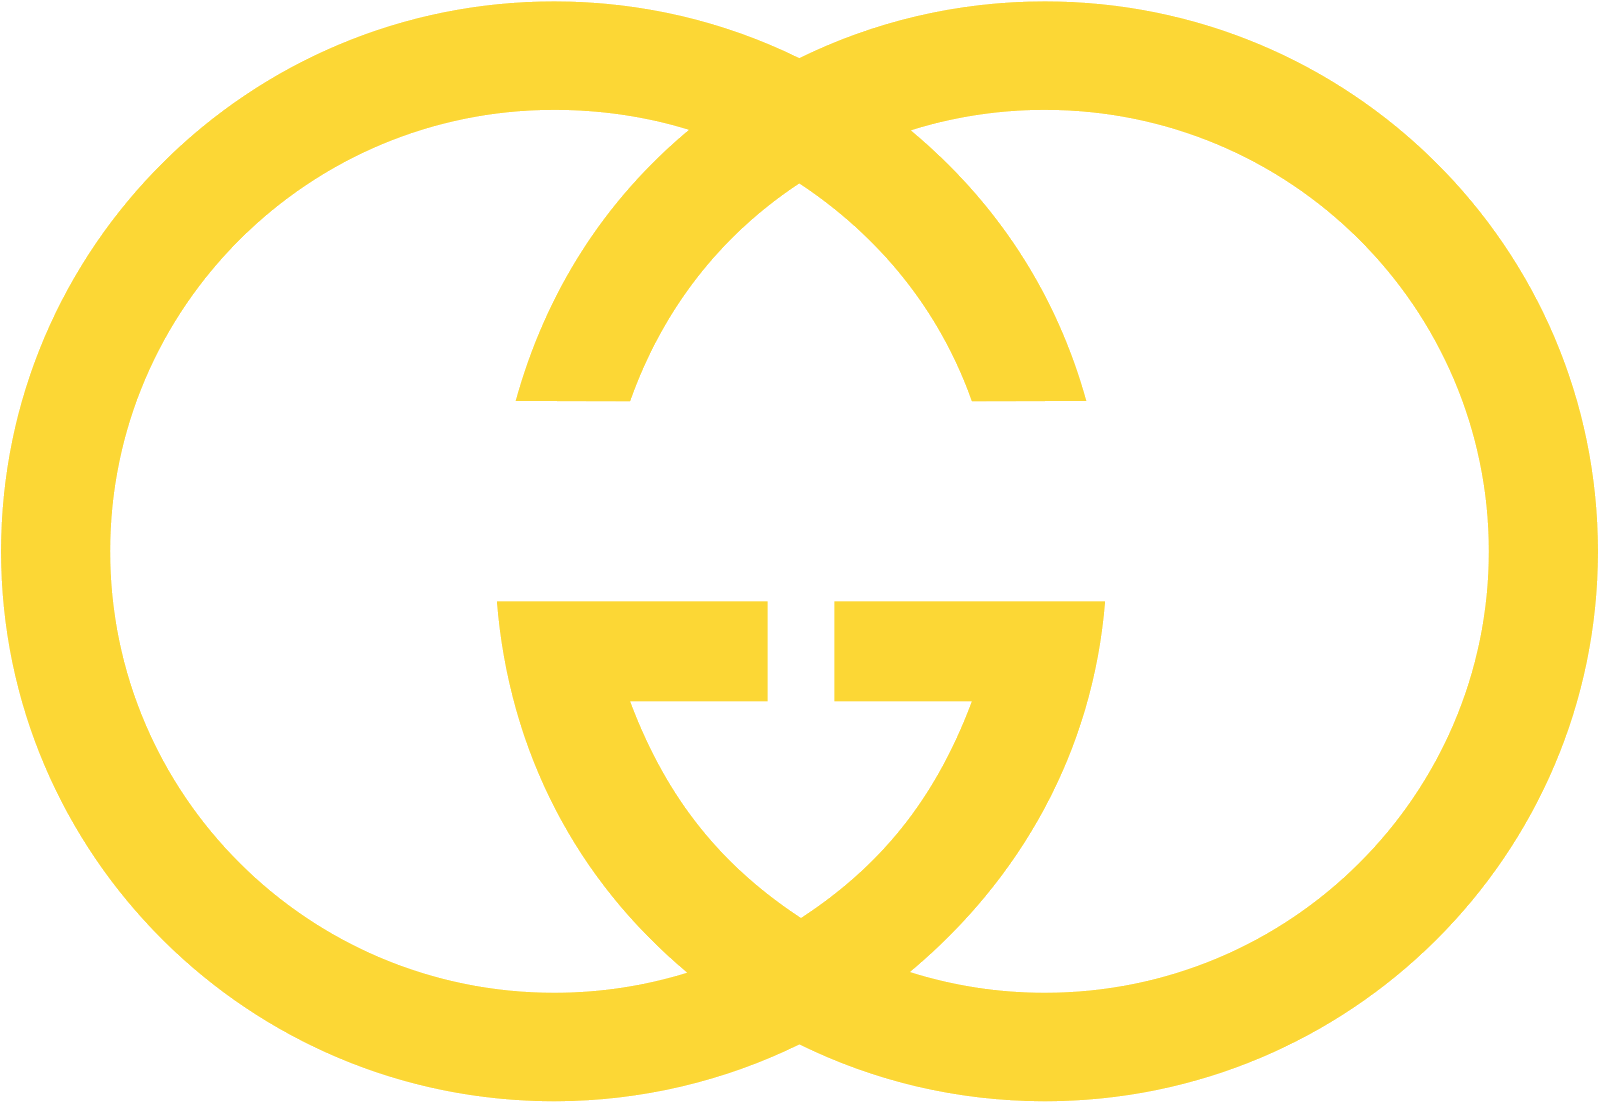 Gucci Logo PNG Background